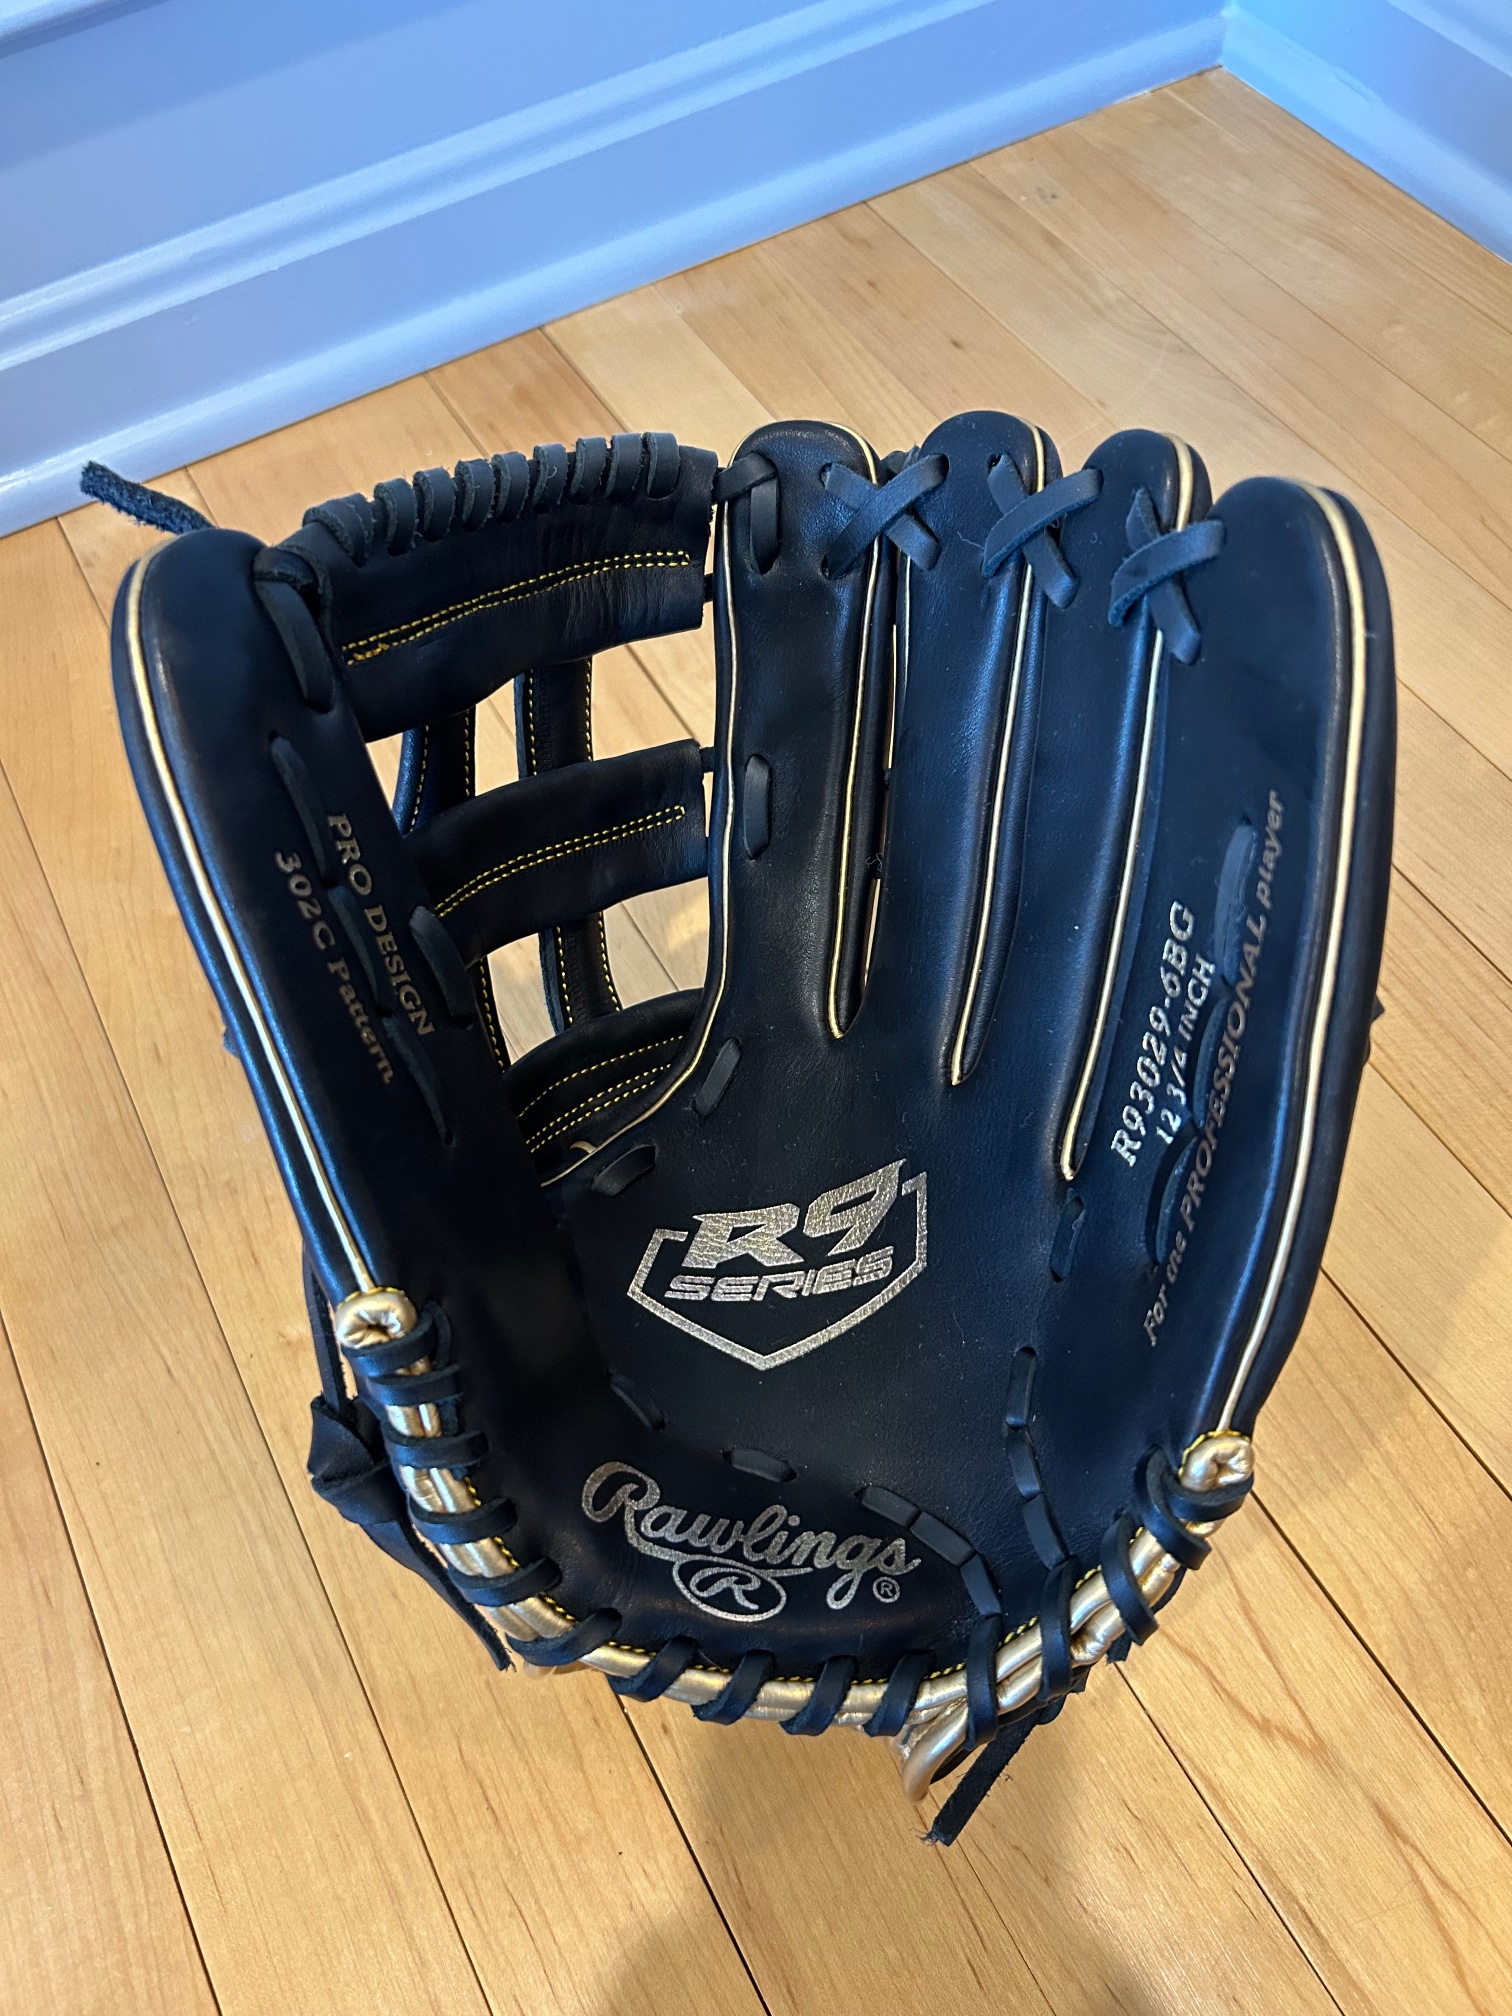 New Right Hand Throw Rawlings Outfield R9 Baseball Glove 12.75"